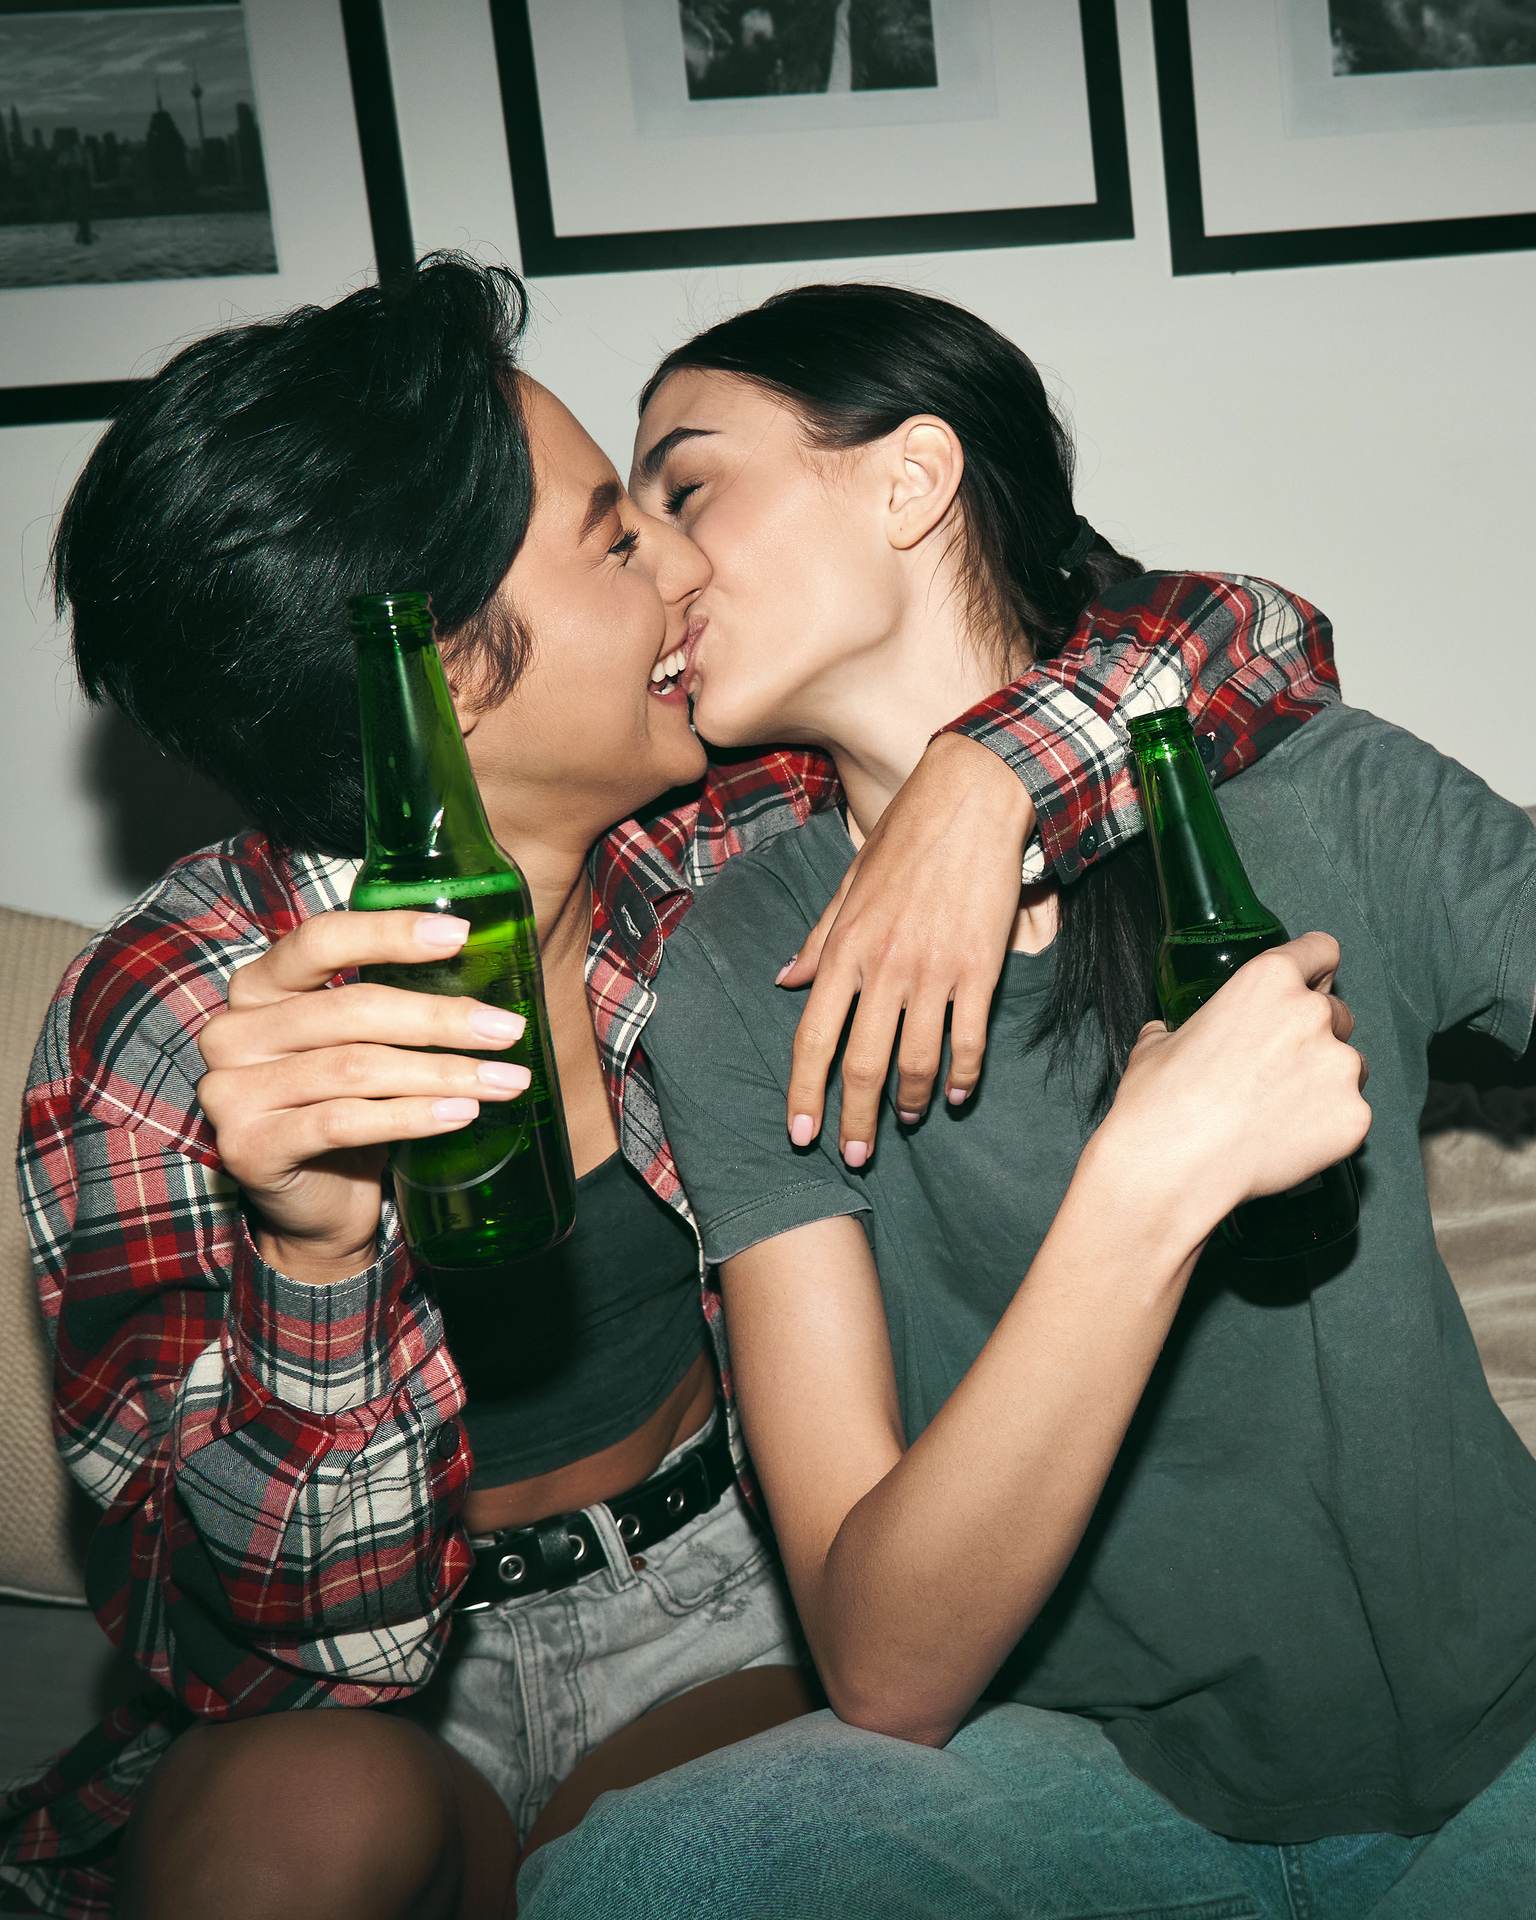 Two women are sitting on a couch and kissing. Both are holding a beer bottle.